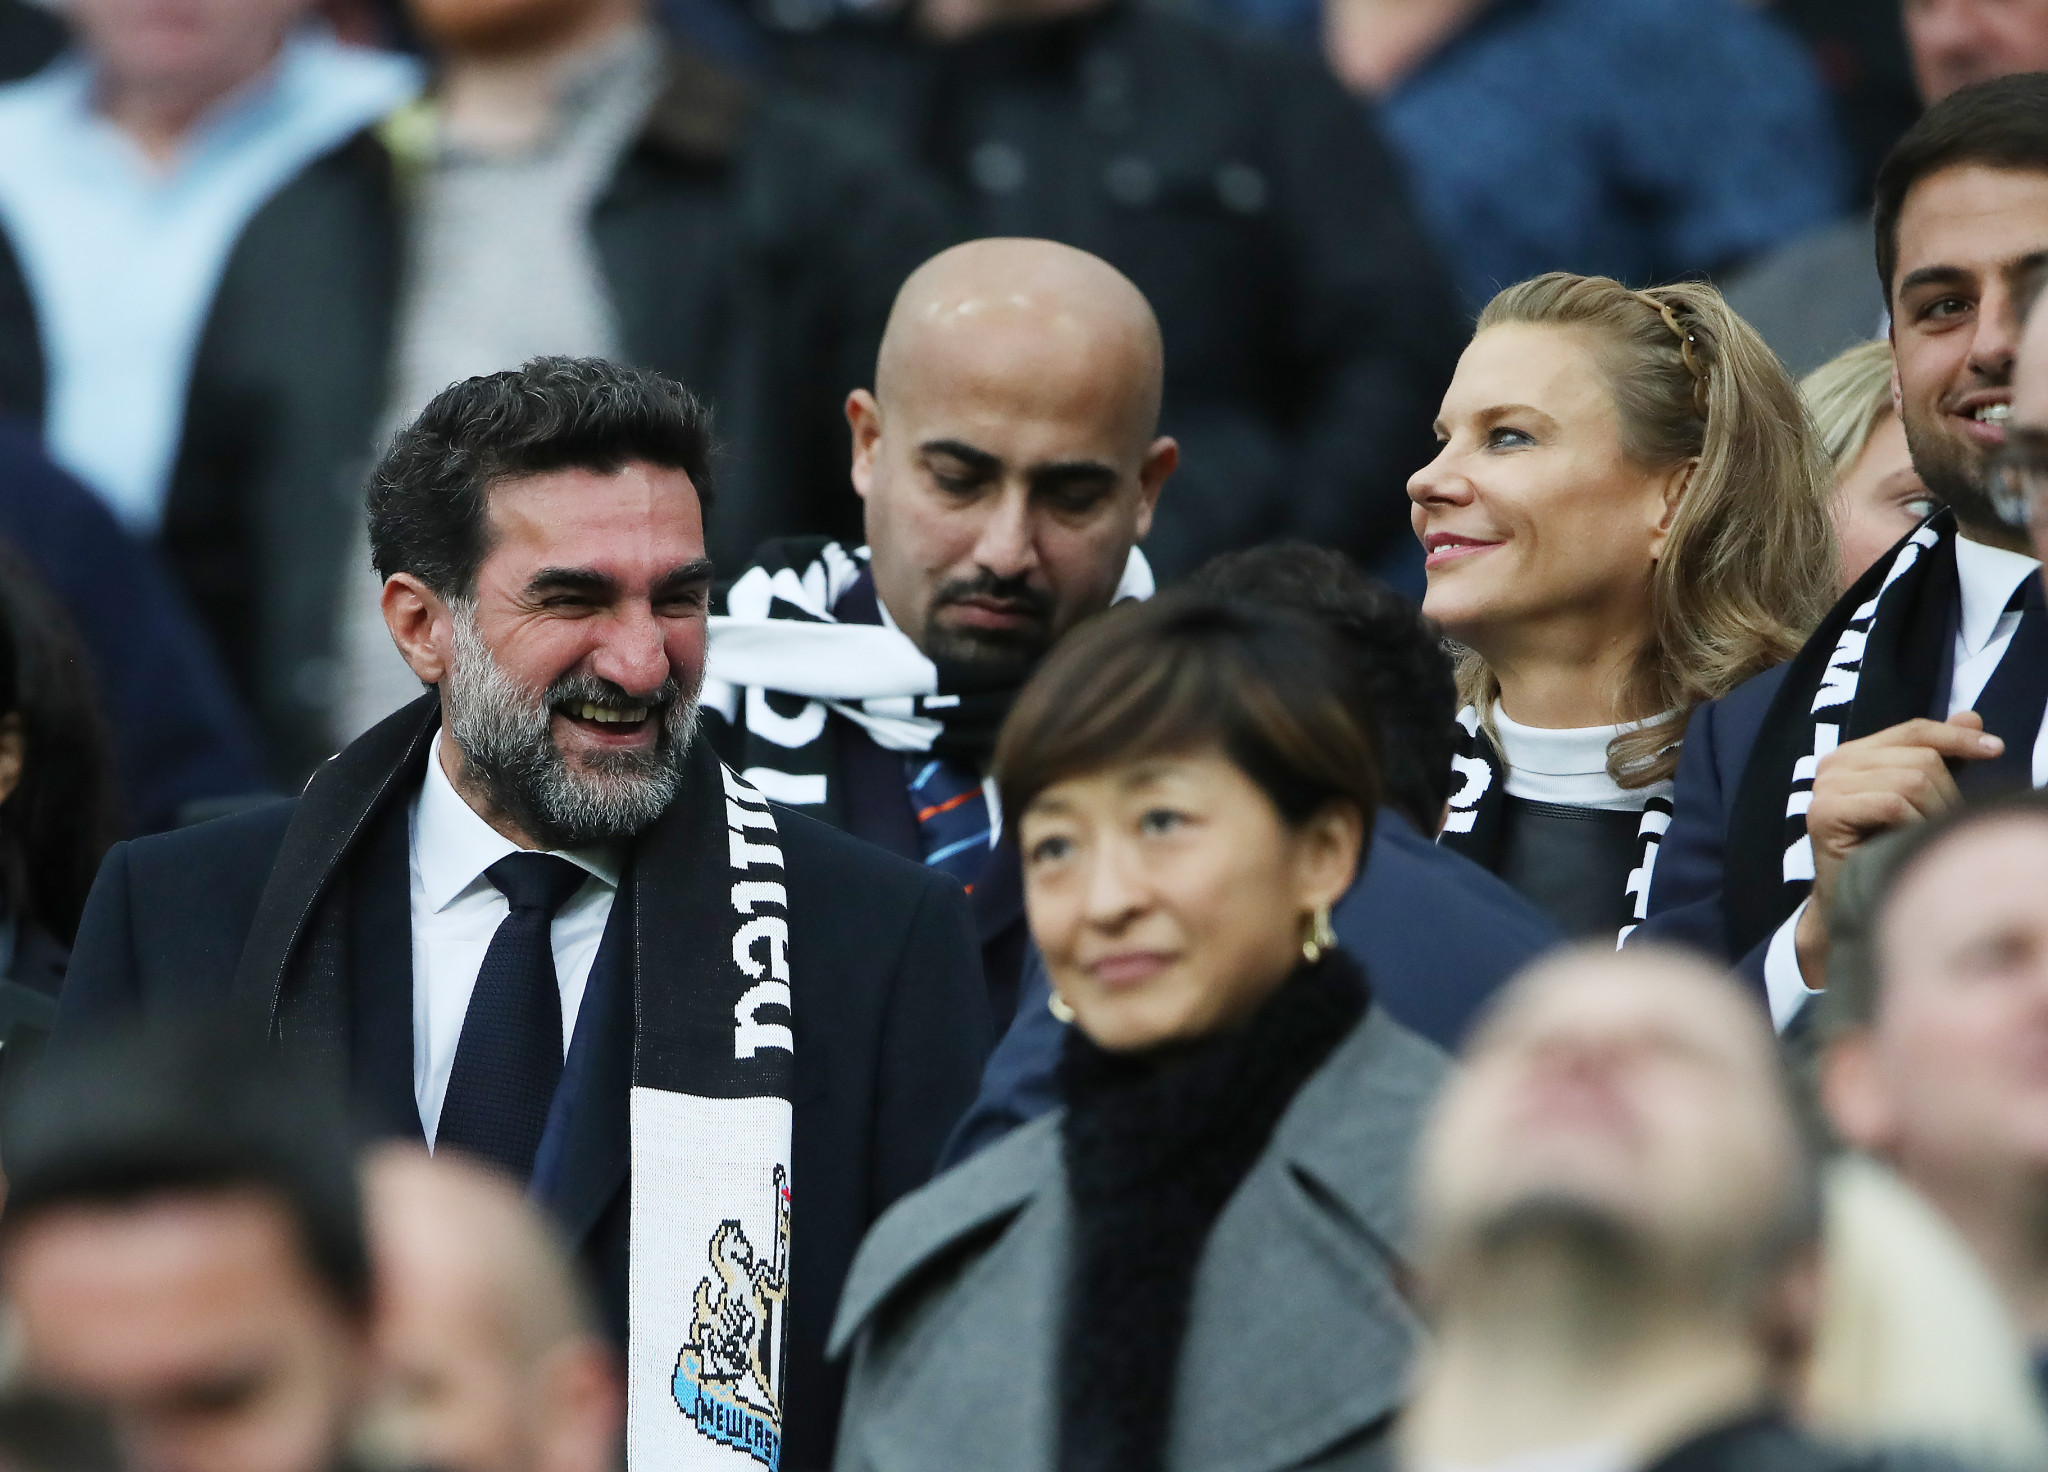 PIF governor Yasir Al-Rumayyan, furthest left, is chair of Premier League club Newcastle United, but Saudi Arabia's rise as a sporting power has brought accusations of sportswashing ©Getty Images